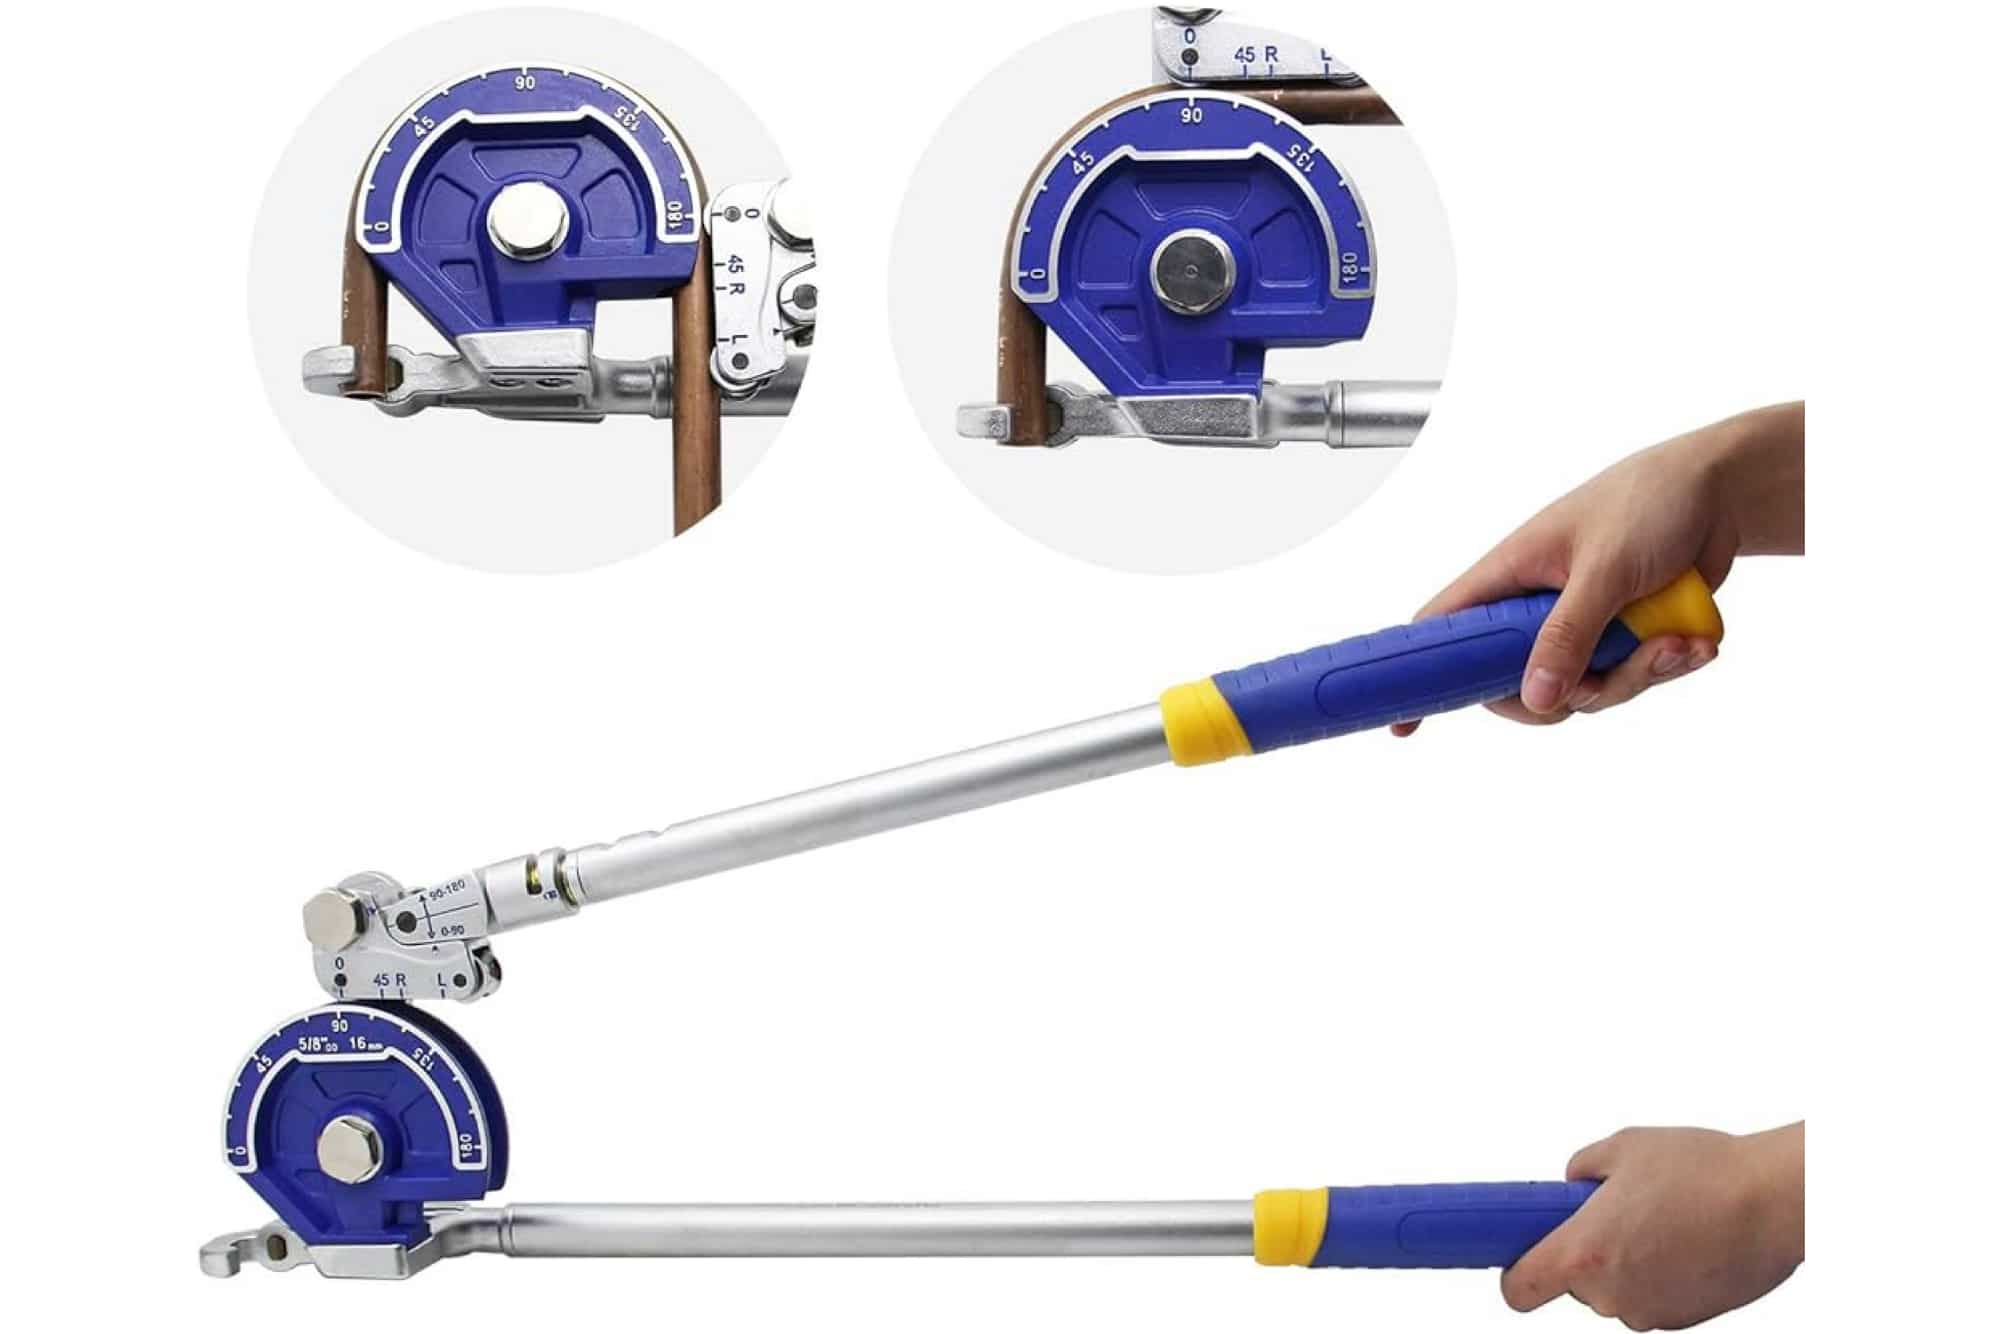 How To Use An Ergonomic Pipe Bender?